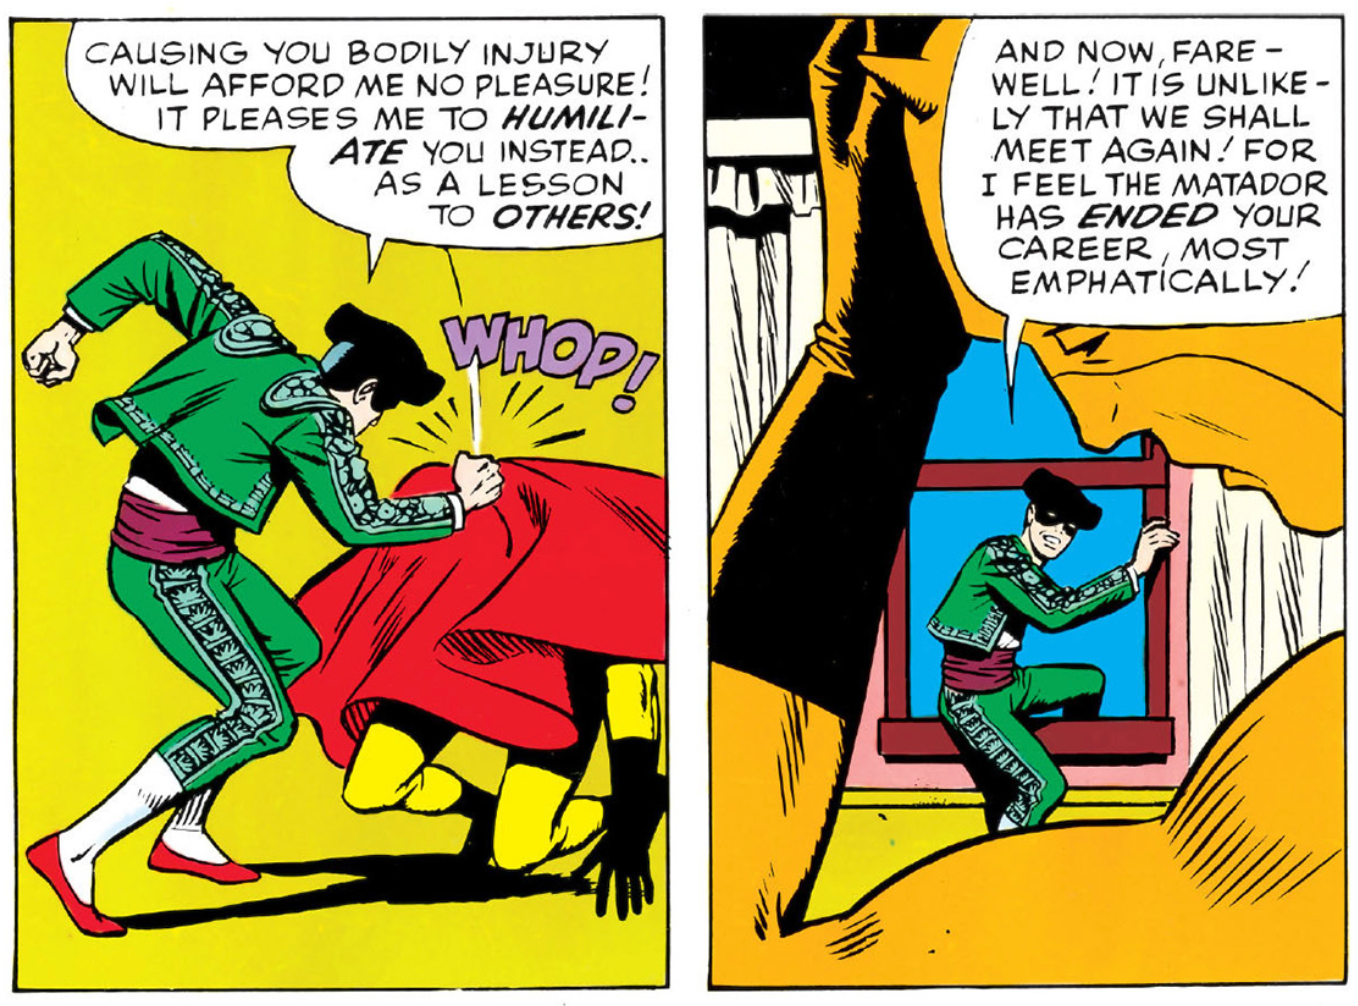 The Matador throwing a blanket over Daredevil's head and "WHOP-ing" him on the head before climbing out the window.